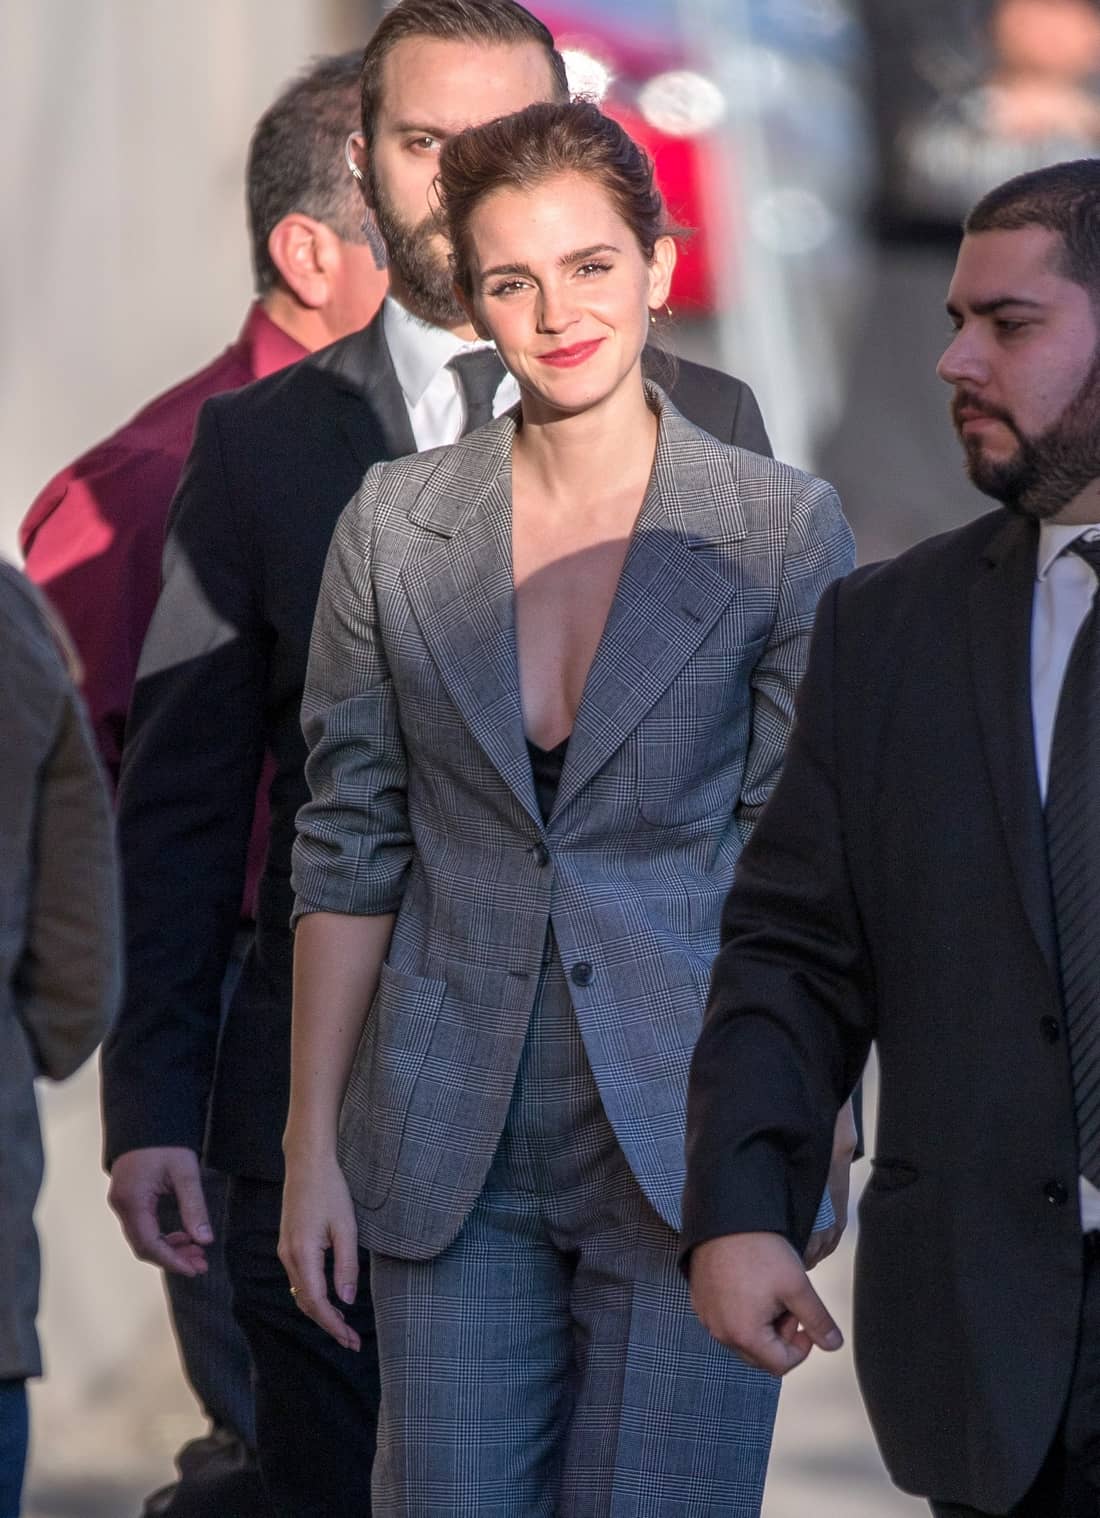 Emma Watson Looked Incredible in a Gray Plaid Pantsuit at Jimmy Kimmel Live